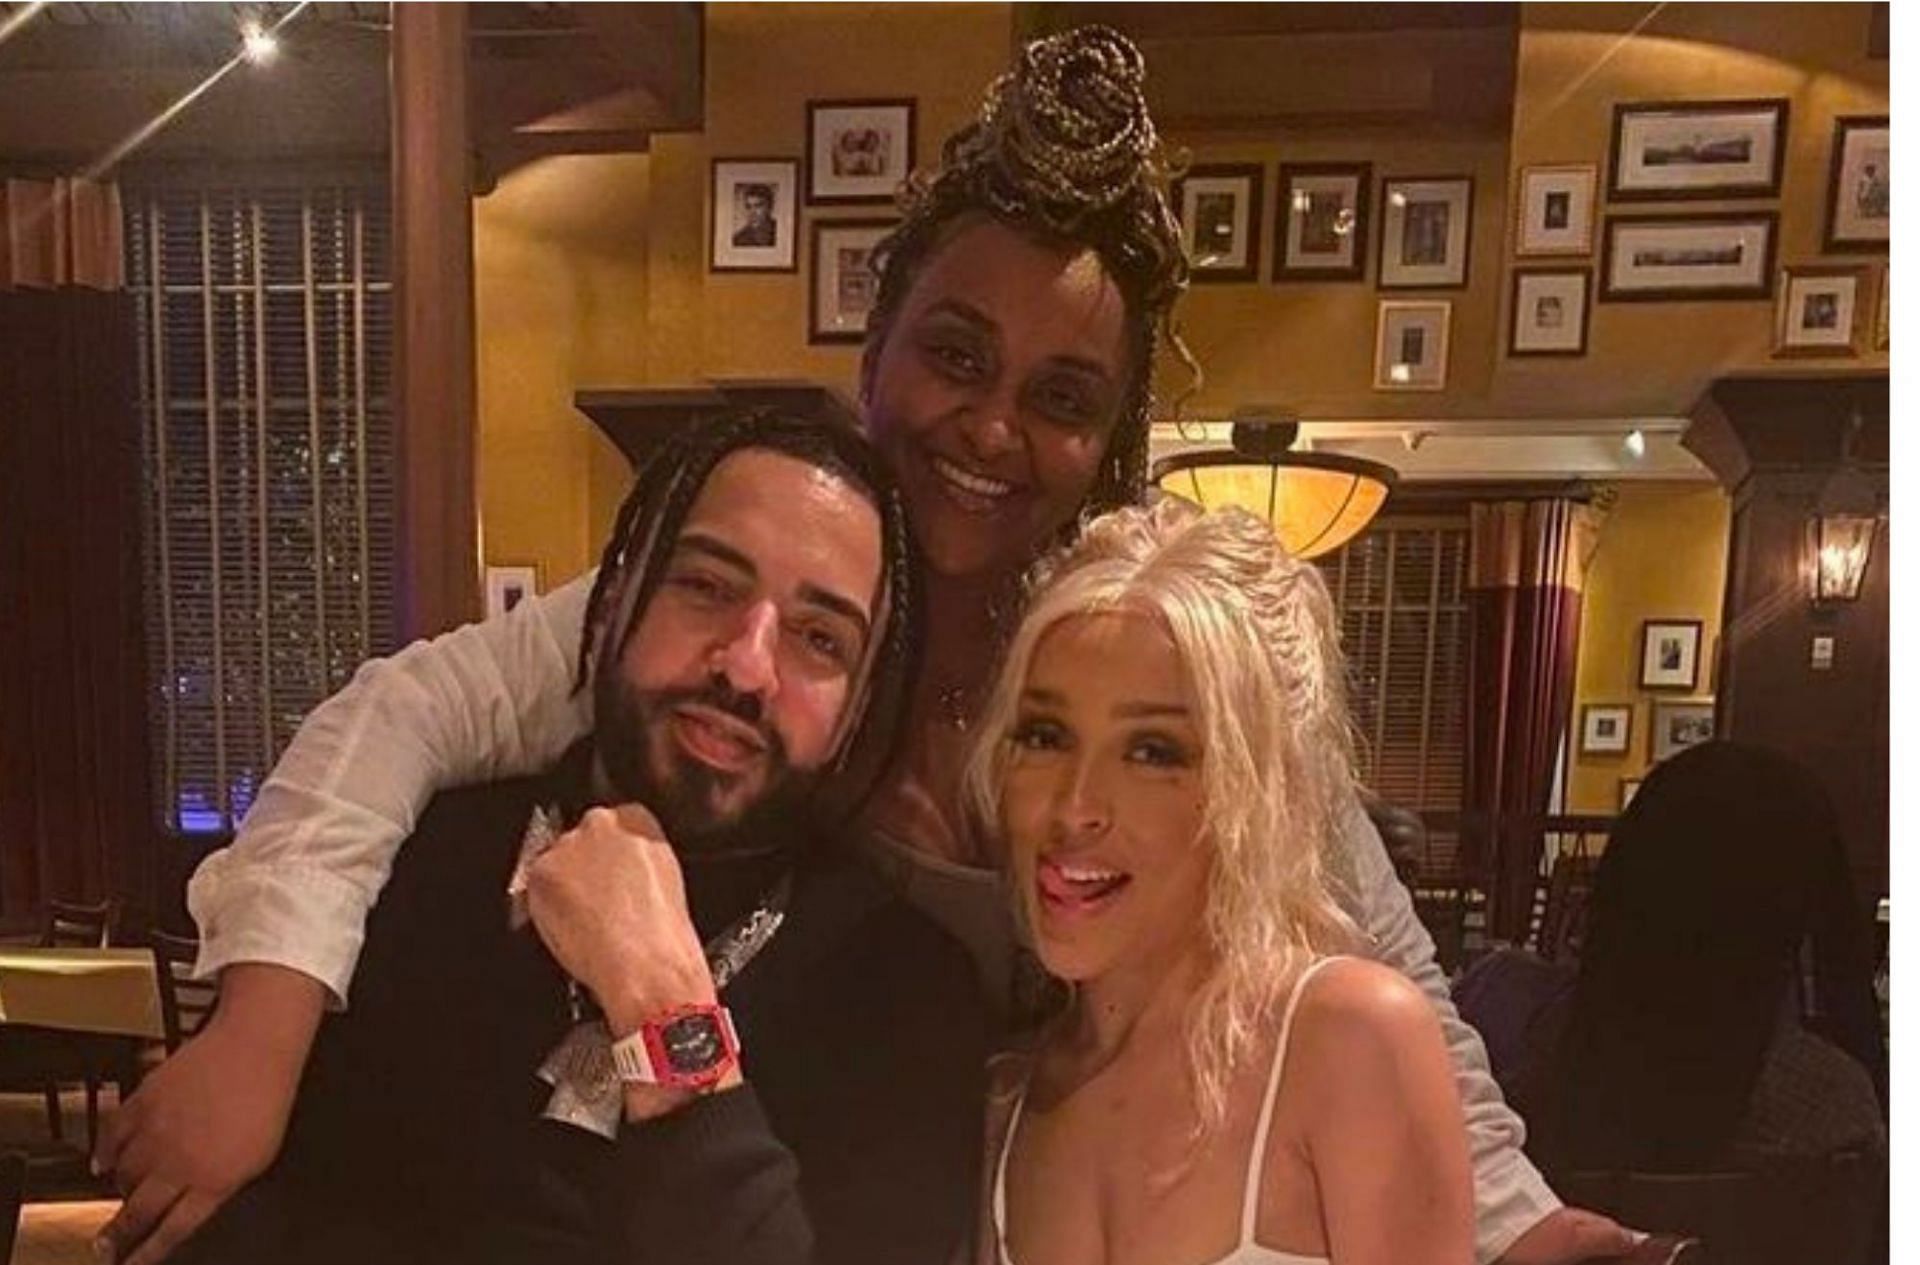 Doja and French vacationed together in the Bahamas (Image via Doja Cat News/Twitter)